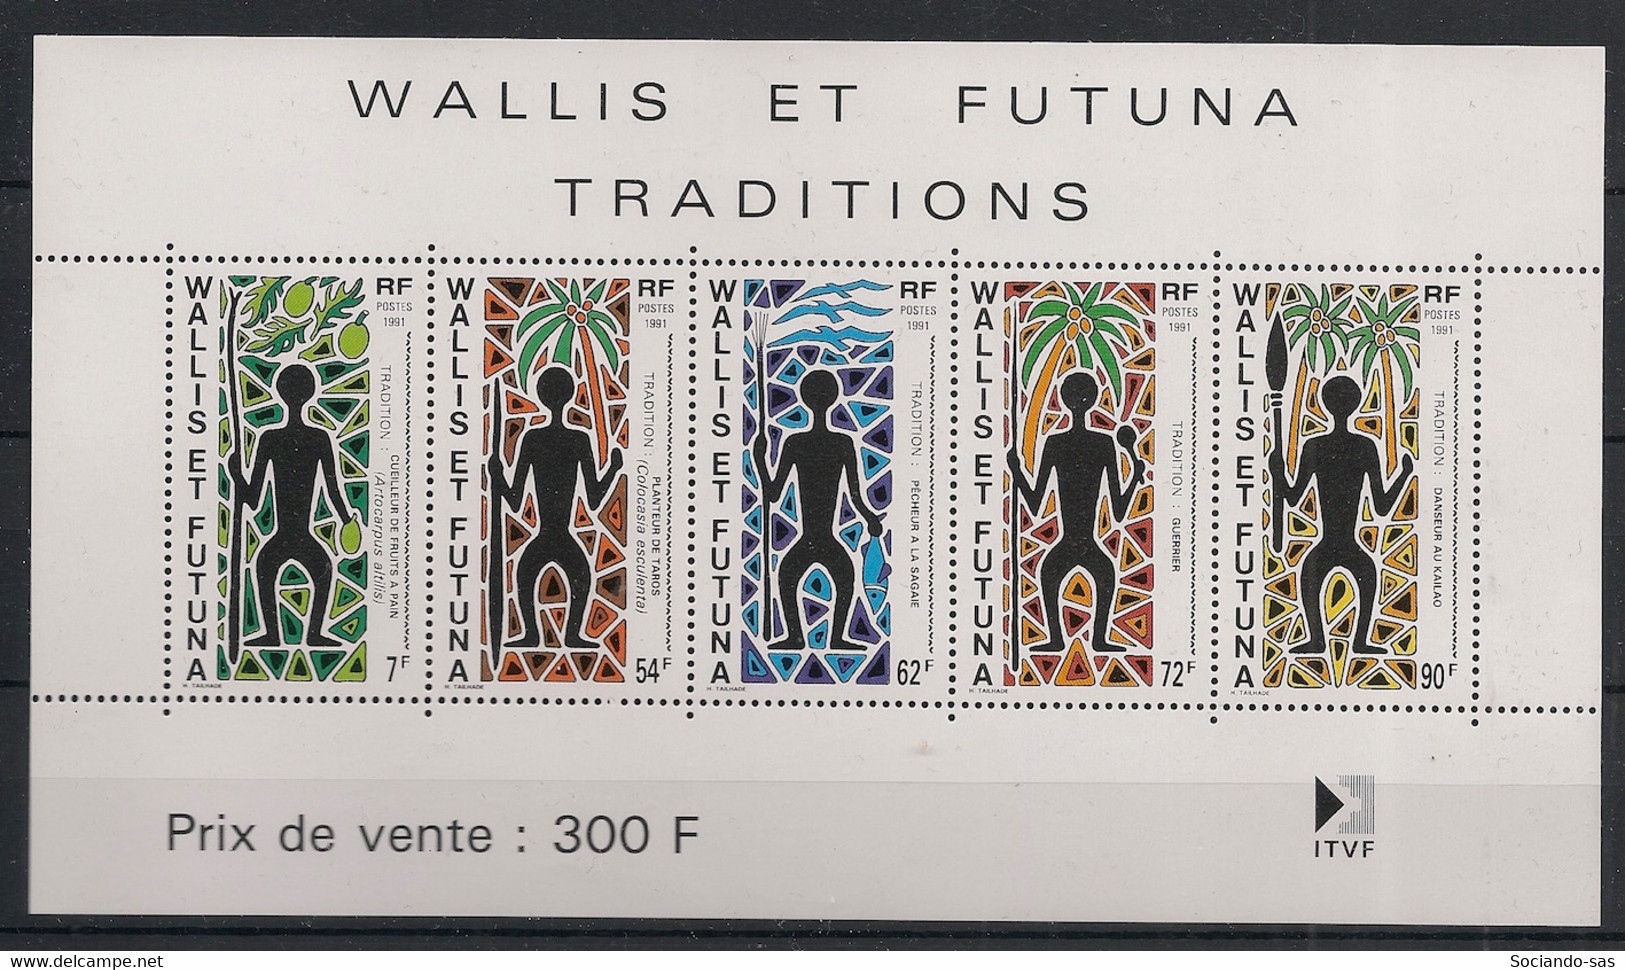 WALLIS ET FUTUNA - 1991 - Bloc Feuillet BF N°YT. 5 - Traditions - Neuf Luxe ** / MNH / Postfrisch - Hojas Y Bloques